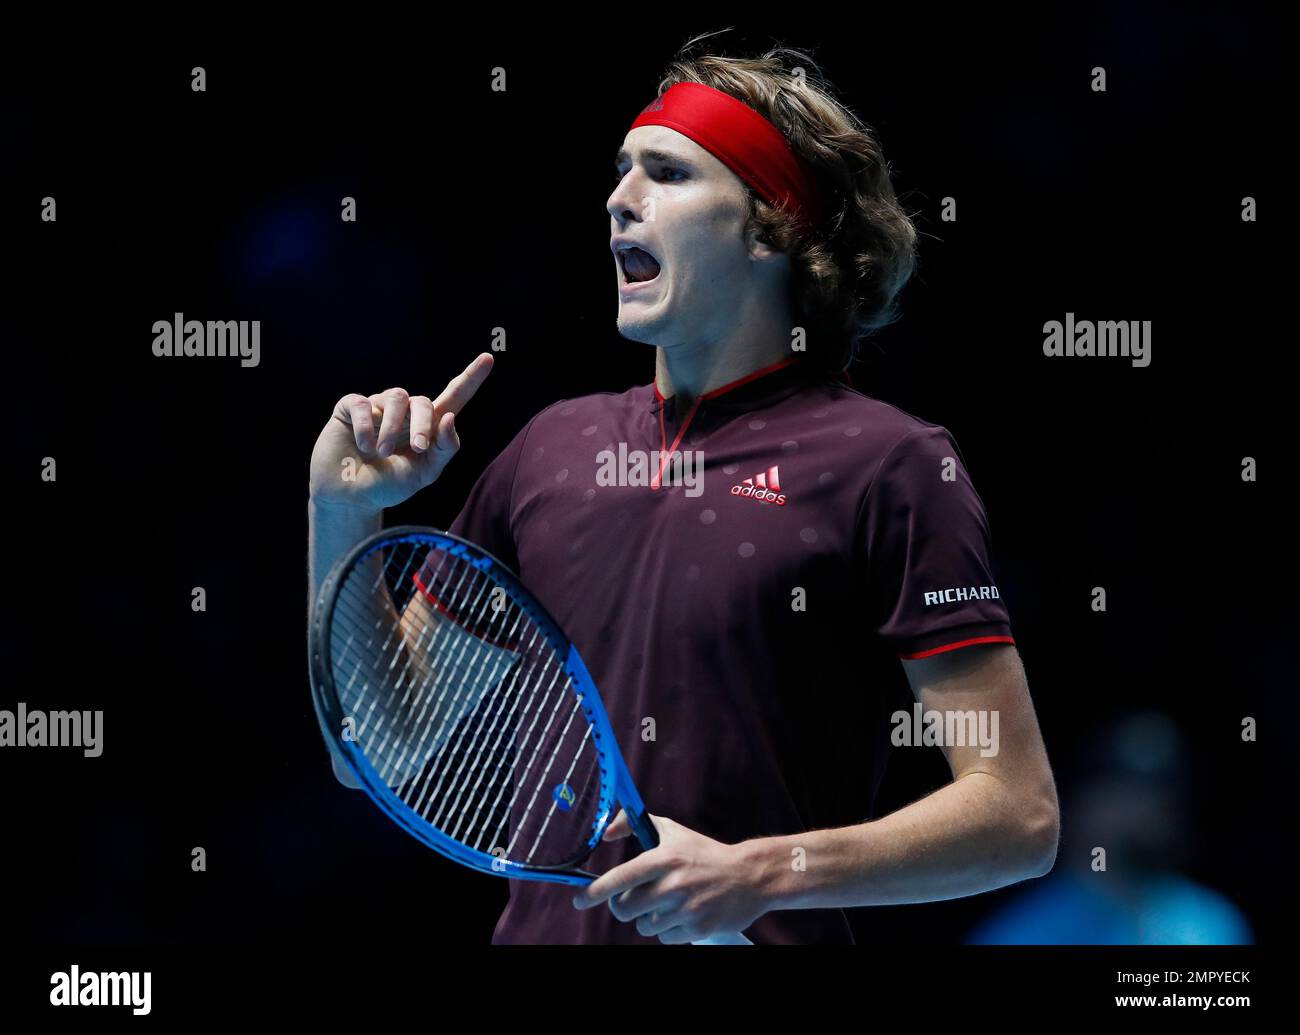 Alexander Zverev of Germany celebrates winning a point after he plays a return to Marin Cilic of Croatia during their singles tennis match at the ATP World Finals at the O2 Arena